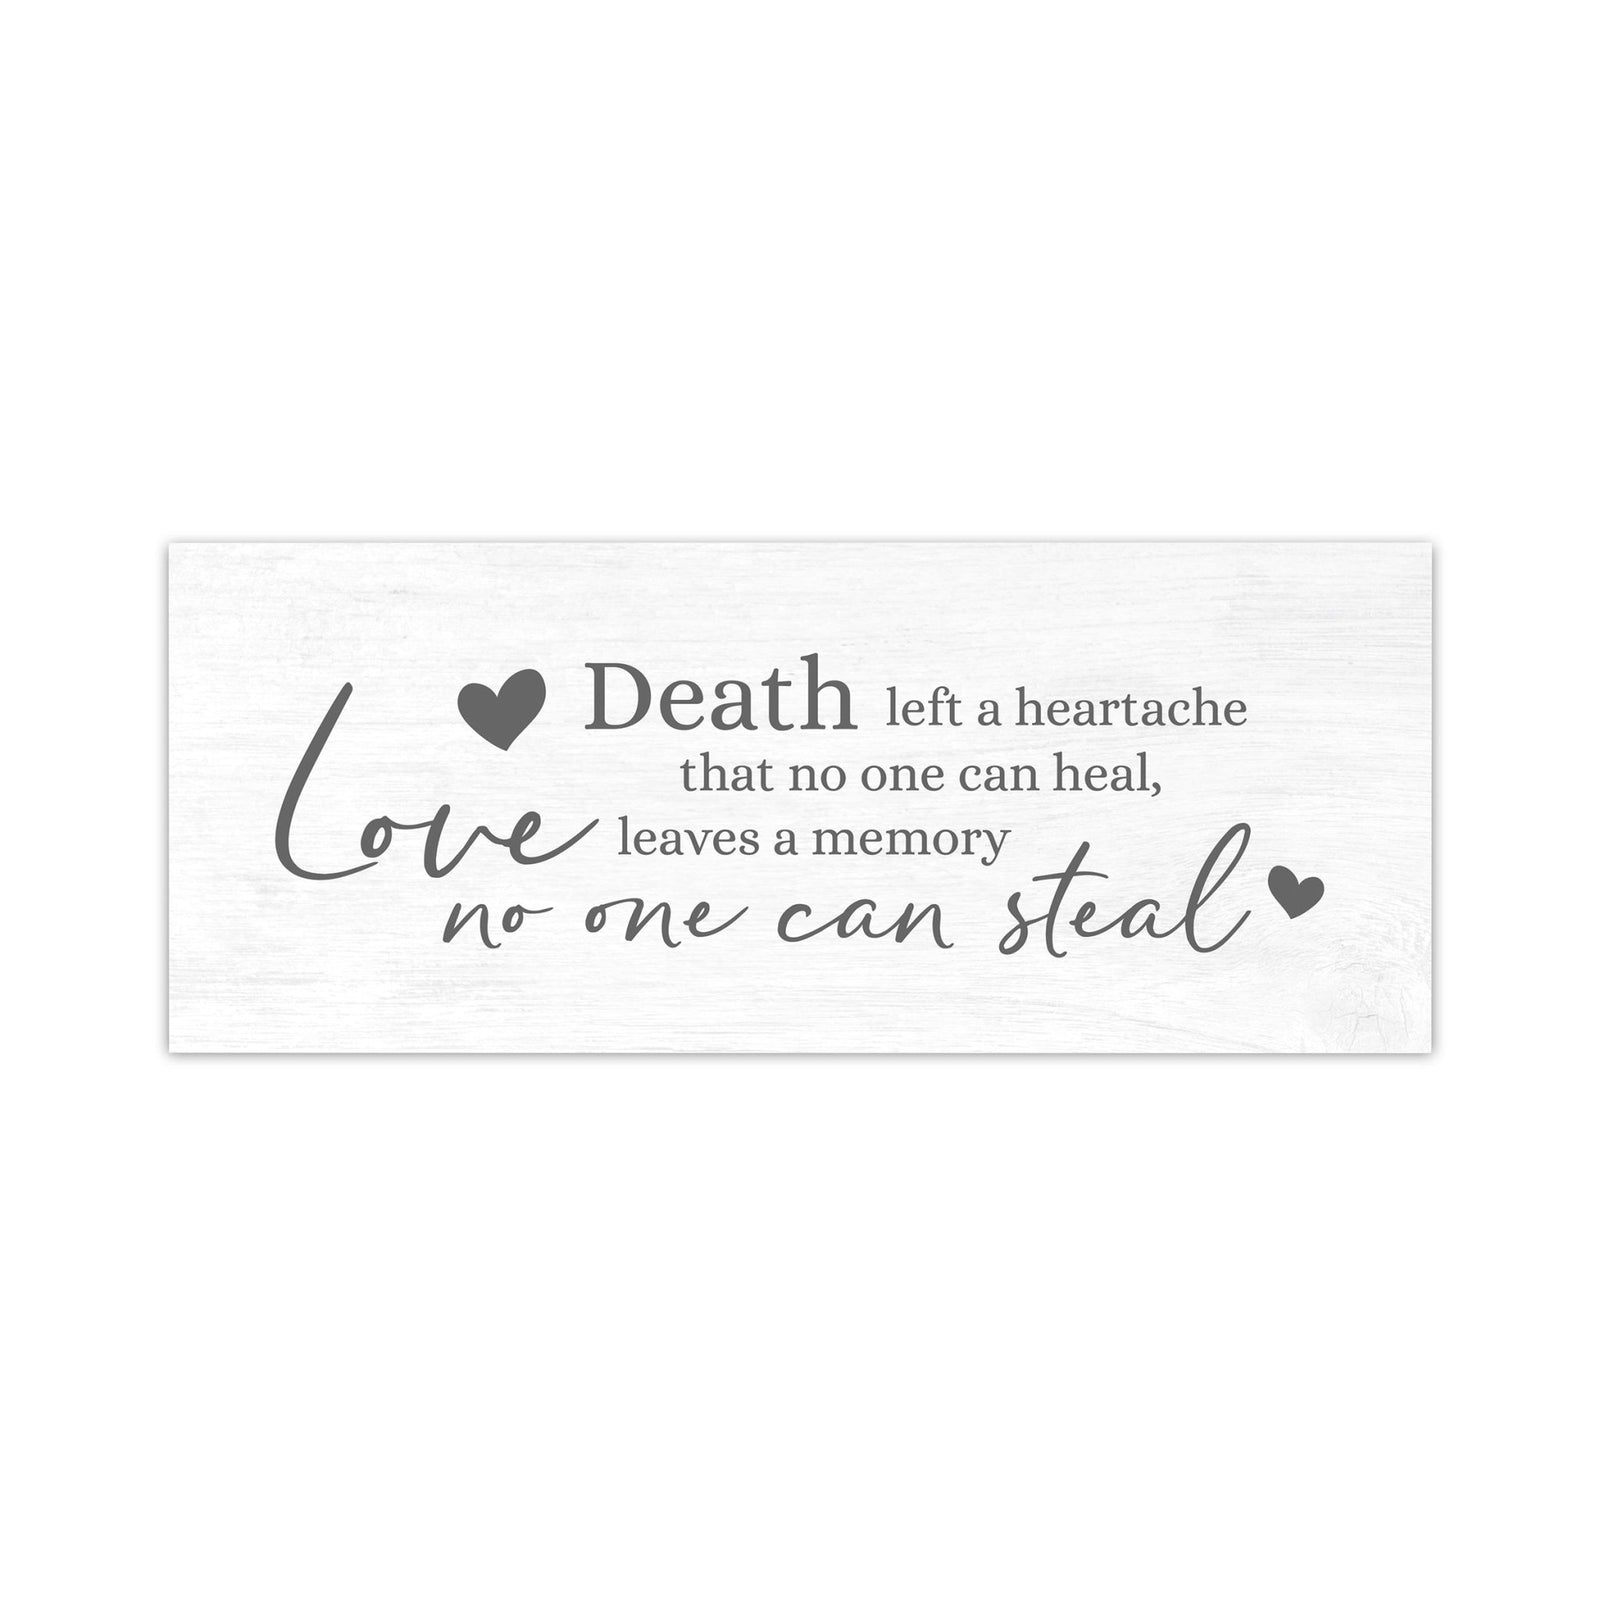 Modern Inspirational Wooden Pet Memorial Wall Art Hanging Plaque 4x10in - Death Left A Heartache - for Family and Home Decorations - LifeSong Milestones